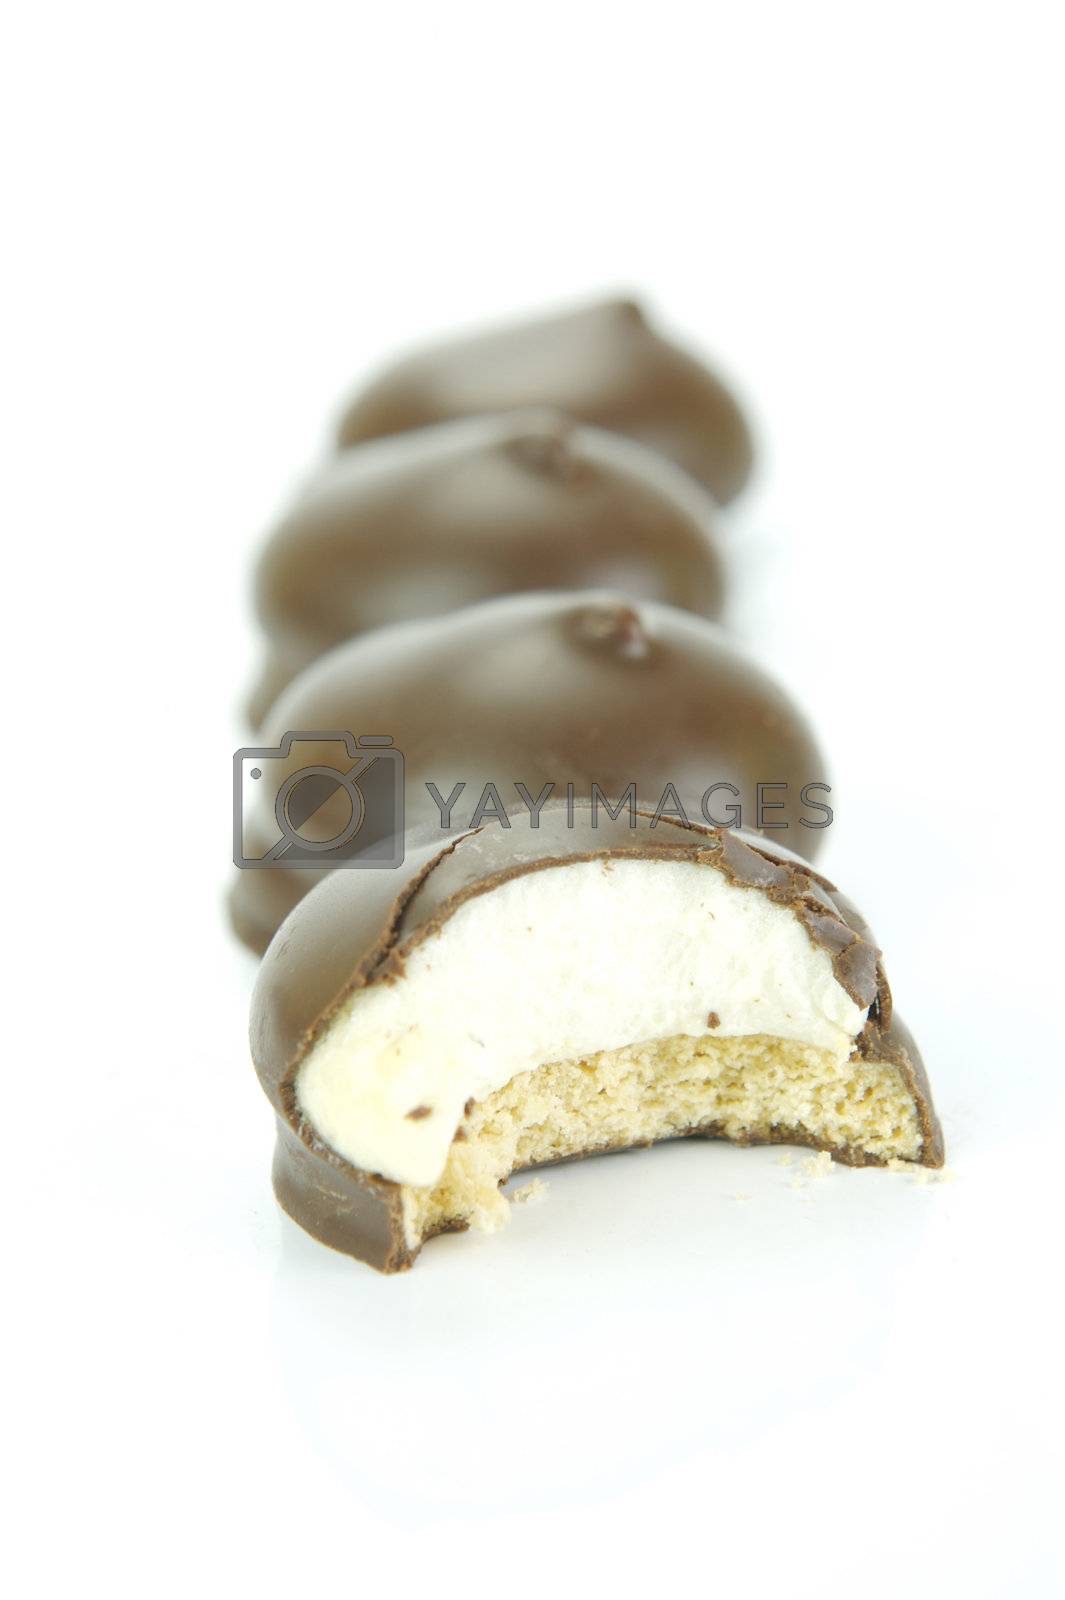 Royalty free image of Marshmallow Biscuits by Kitch